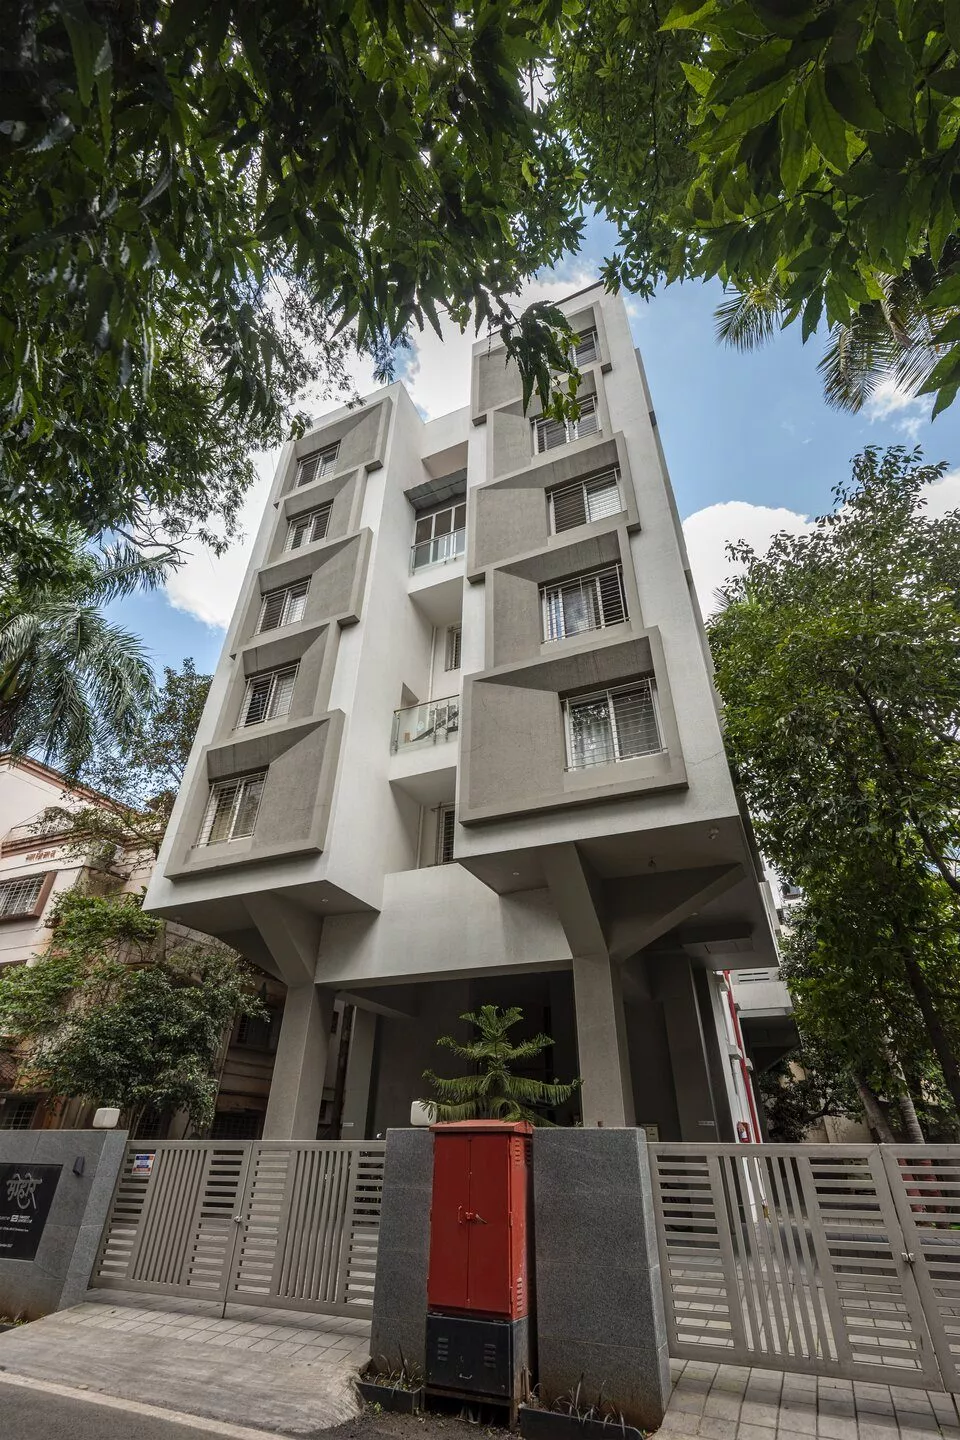 3 BHK Flats in Pune | Buy Premium Homes at Mohor- Lateral view